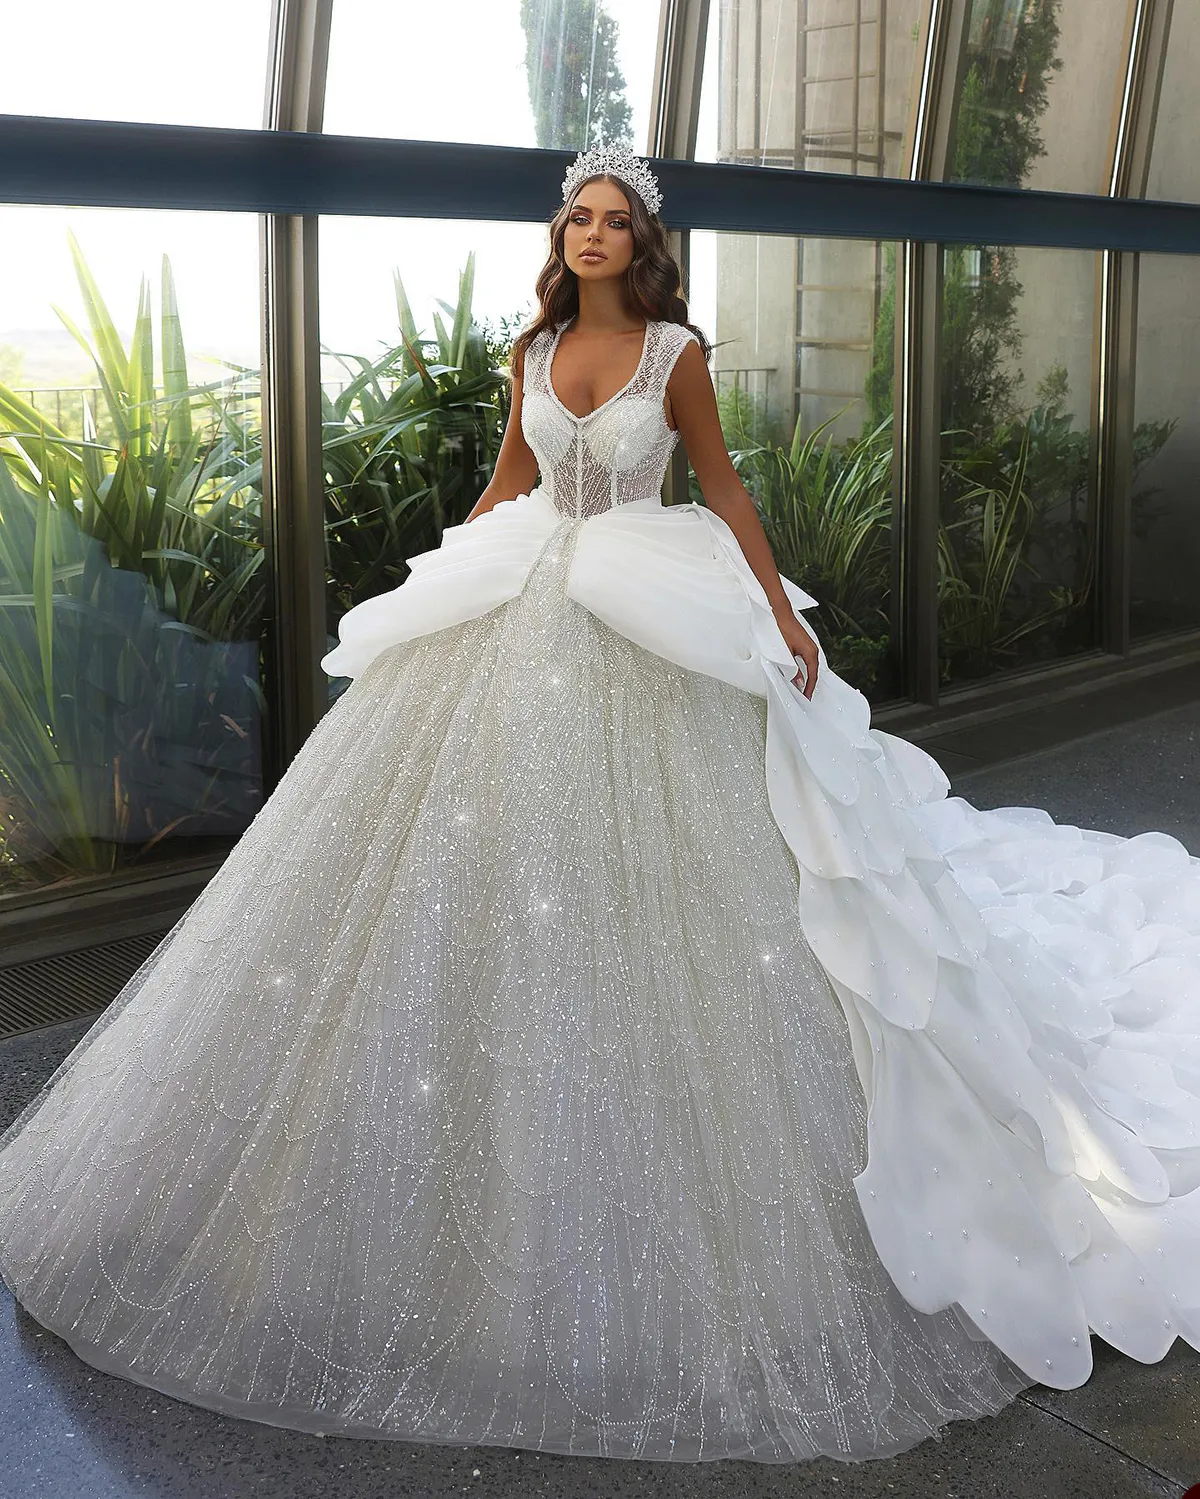 Gorgeous Ball Gown Wedding Dresses Scoop Shining Applicants Lace Layered Up Backless Pearls Court Gown Custom Made Plus Size Bridal Gown Vestidos De Novia